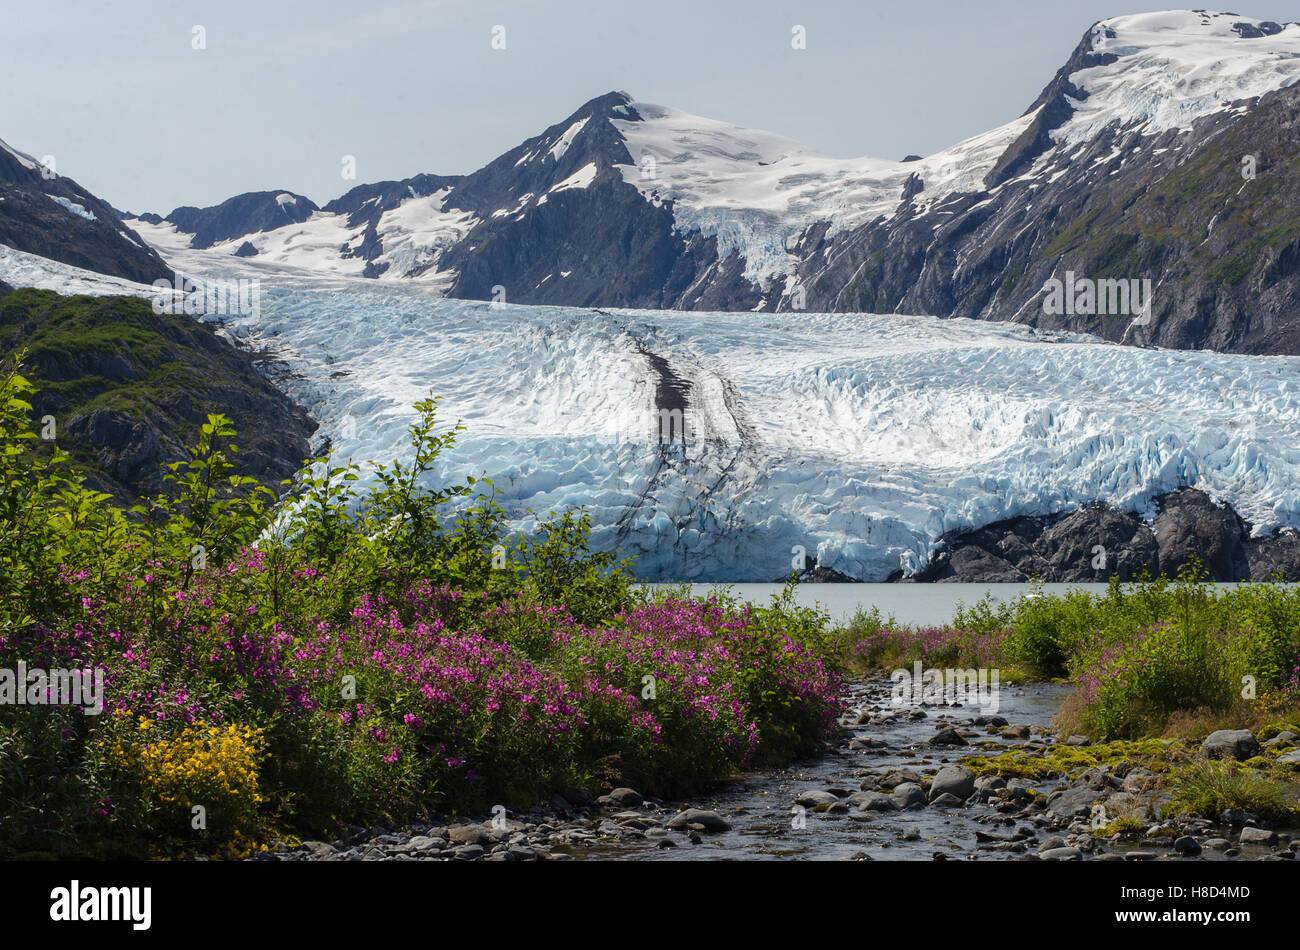 A mountain stream flows into Portage Glacier lake with the glacier in the background. Stock Photo